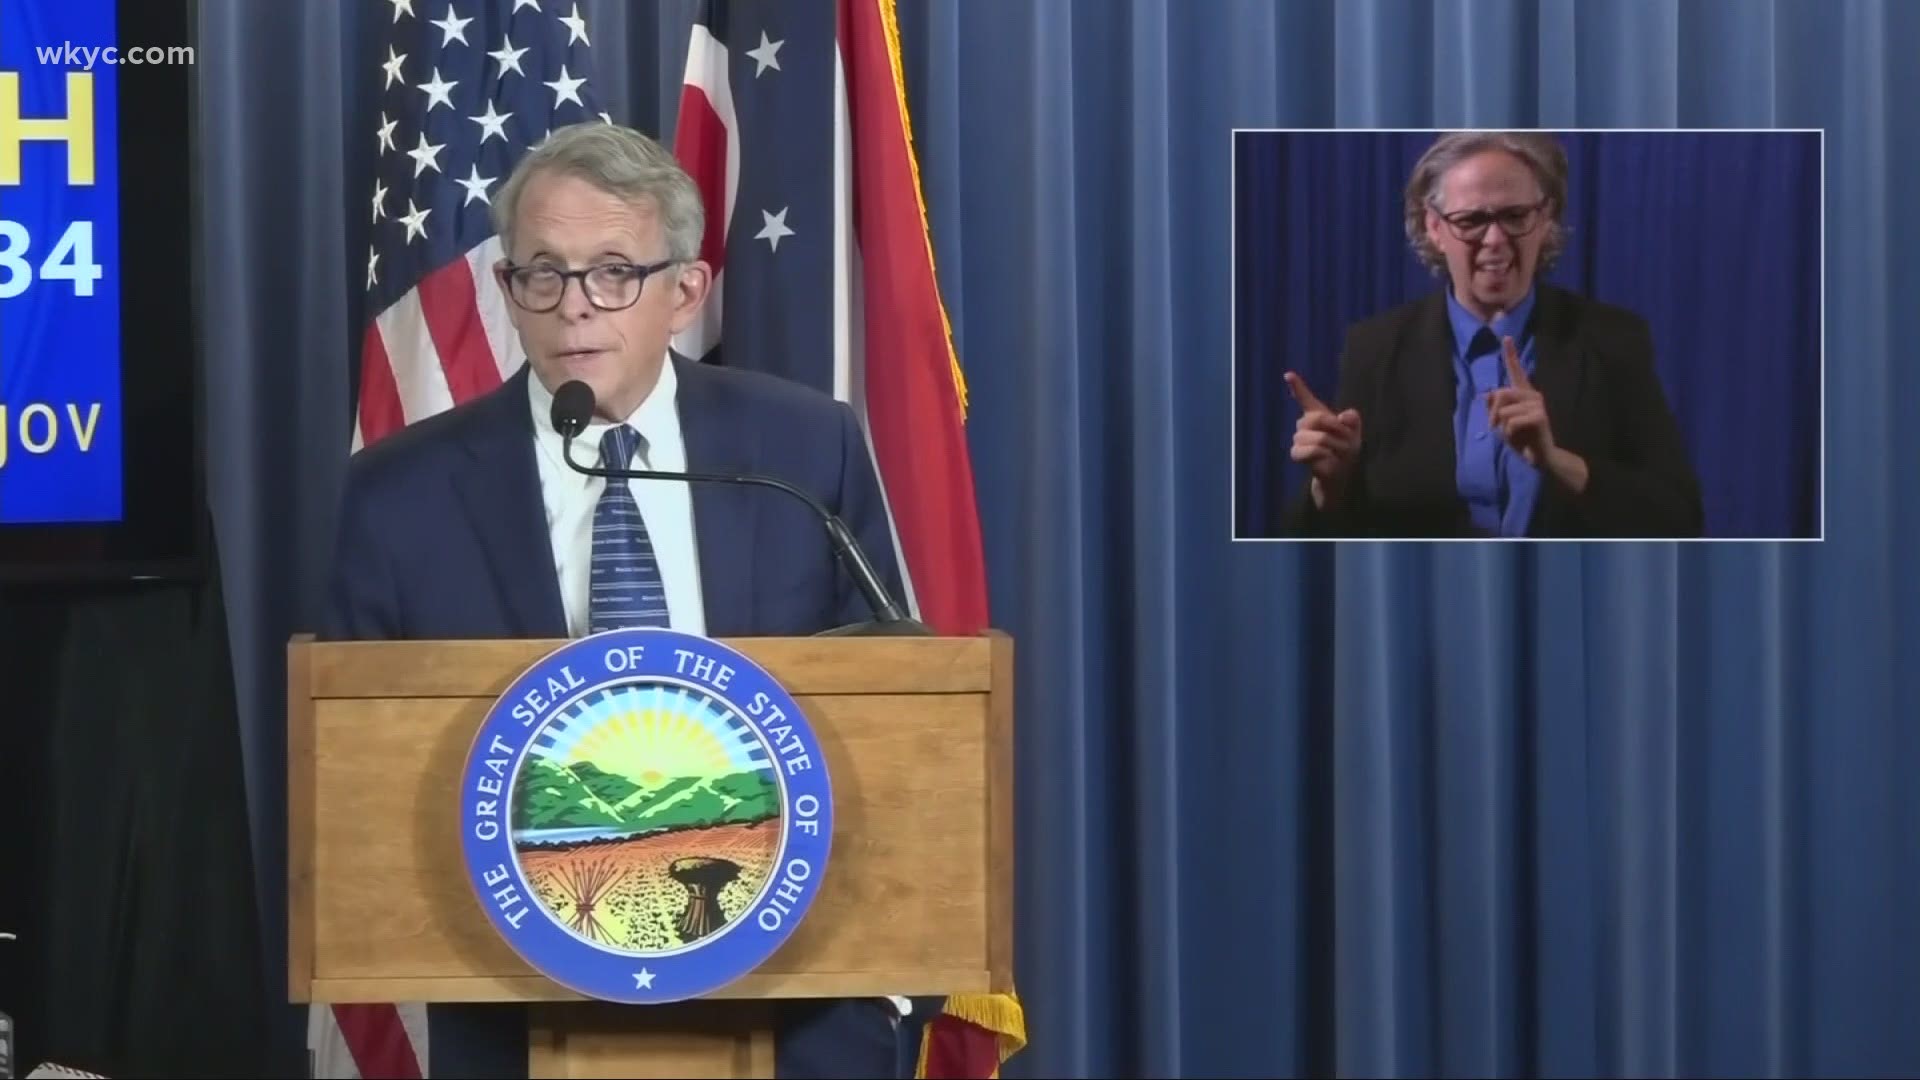 Gov. DeWine is accused of violating the Ohio and United States Constitutions. That is in addition to multiple sections of the Ohio Revised Code.